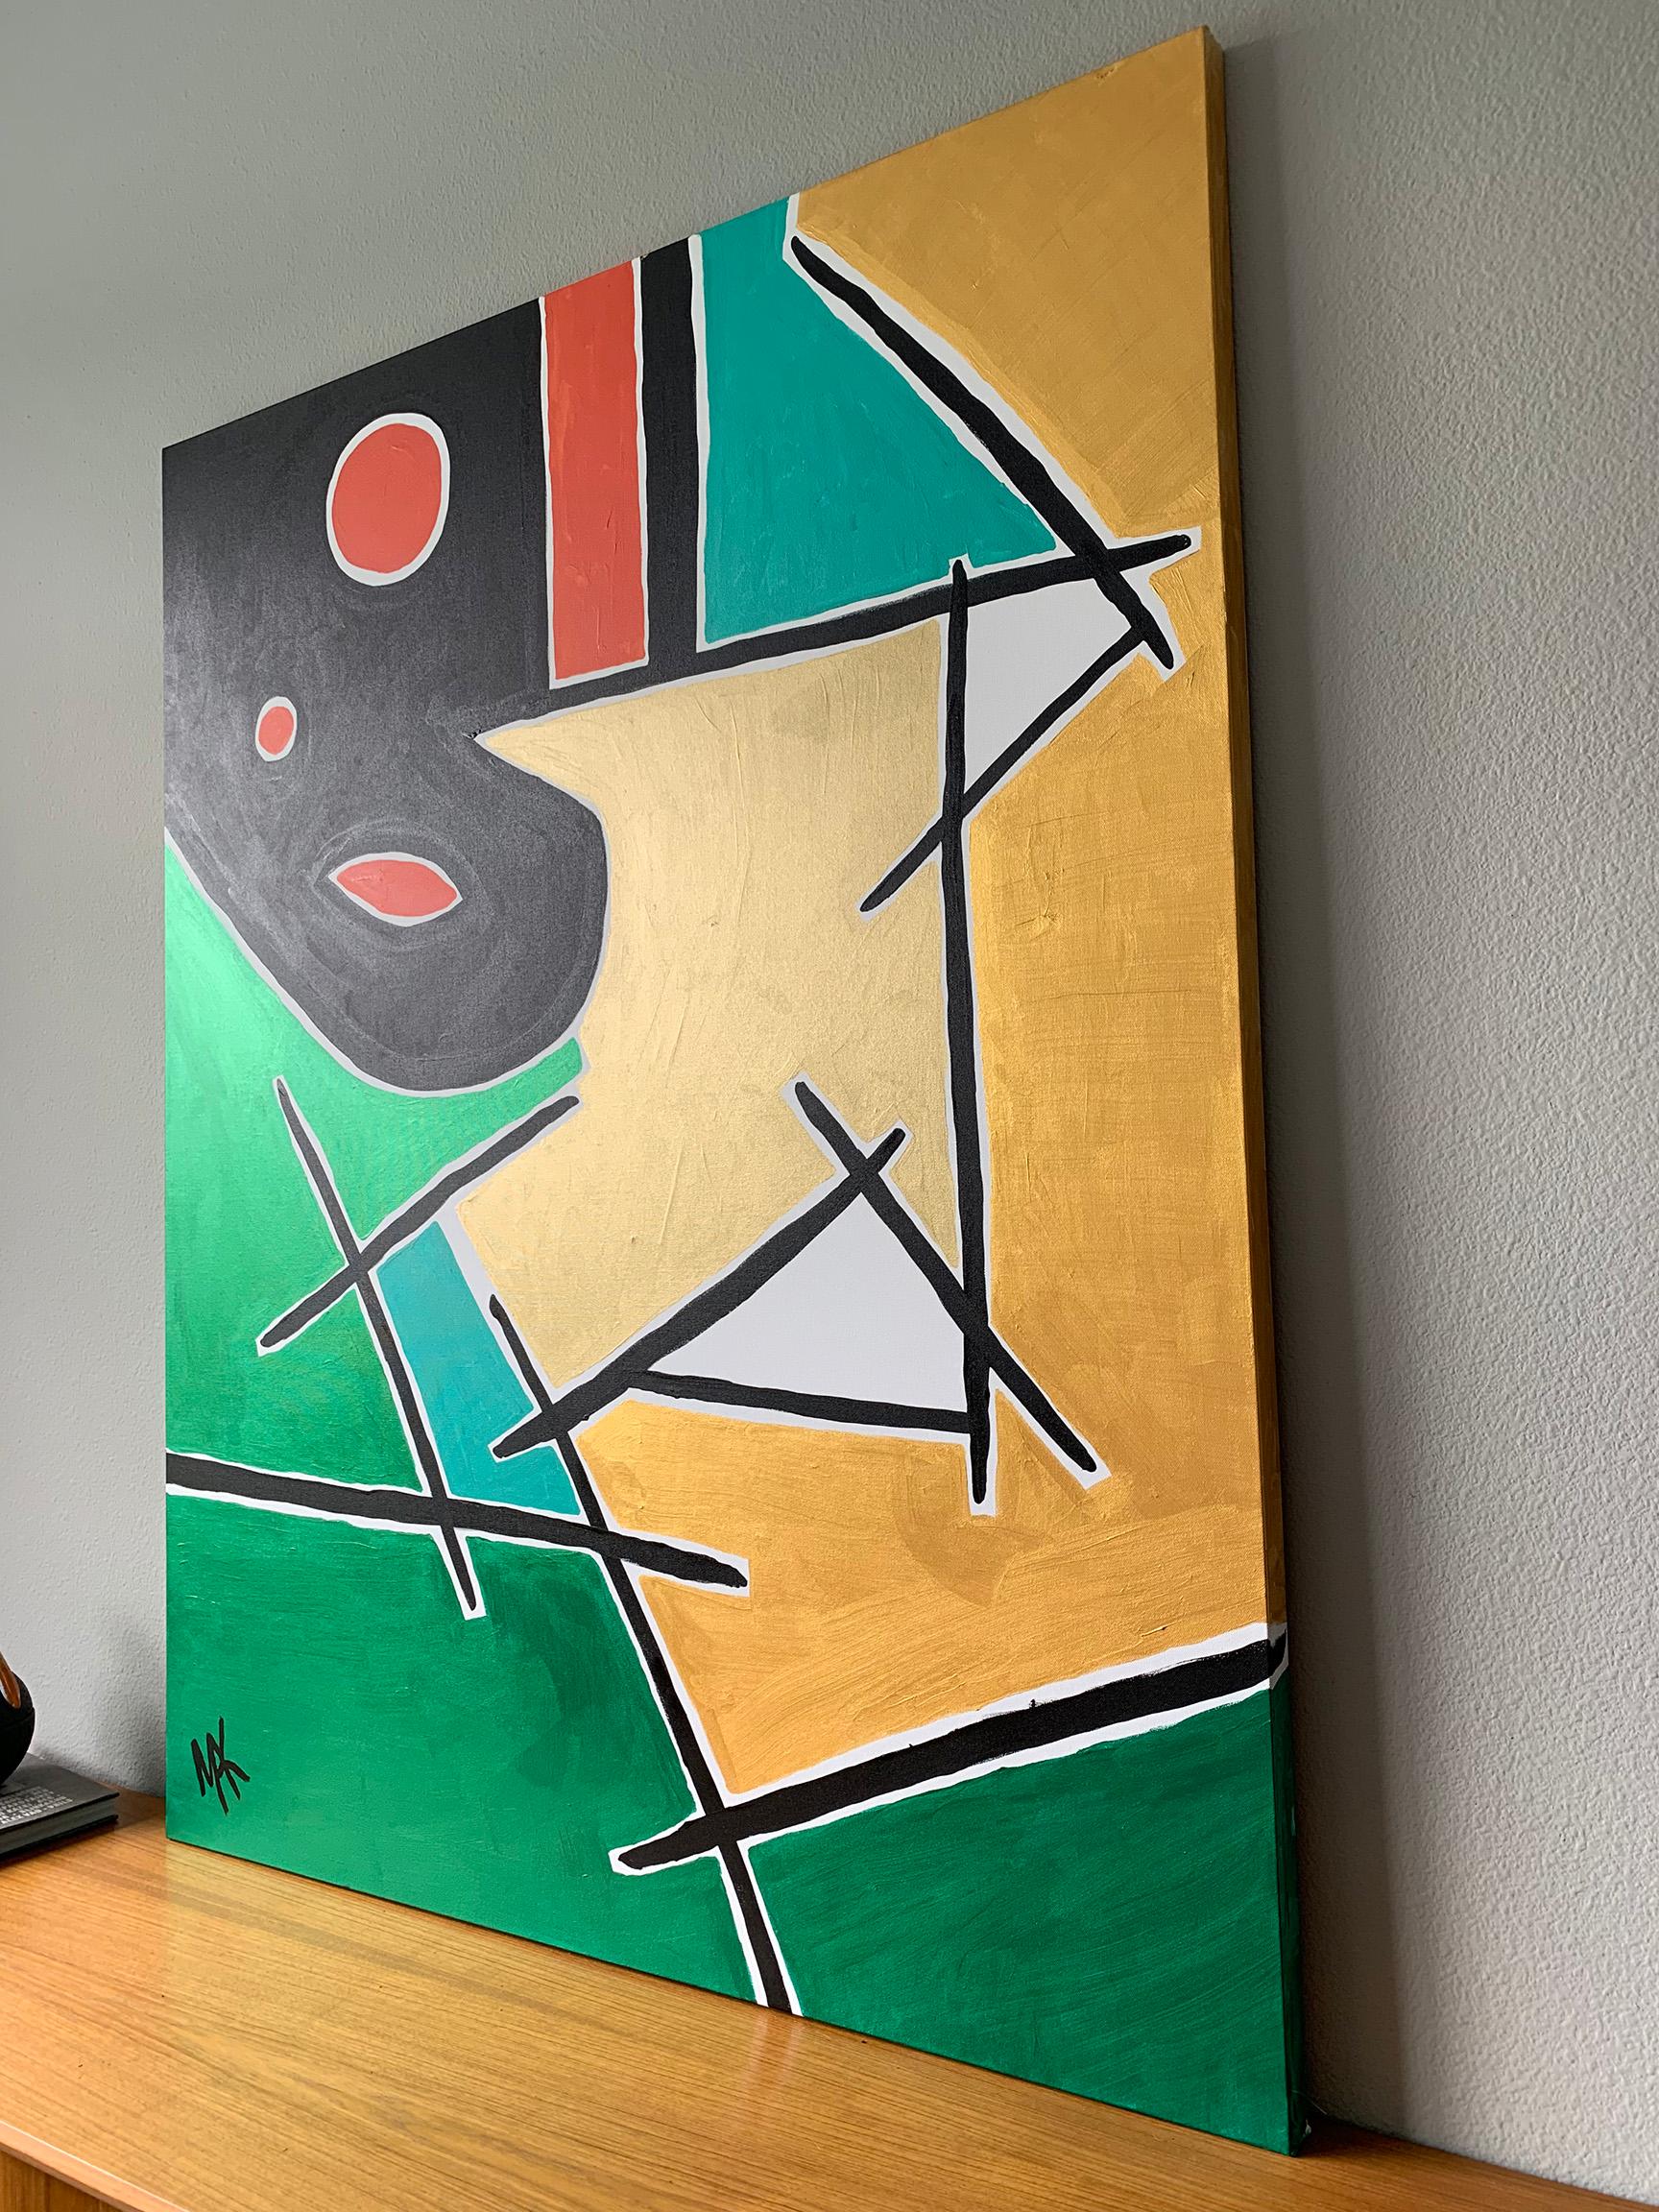 Large Format Modernist Acrylic on Canvas, Mak, 2019 im Zustand „Gut“ in Culver City, CA